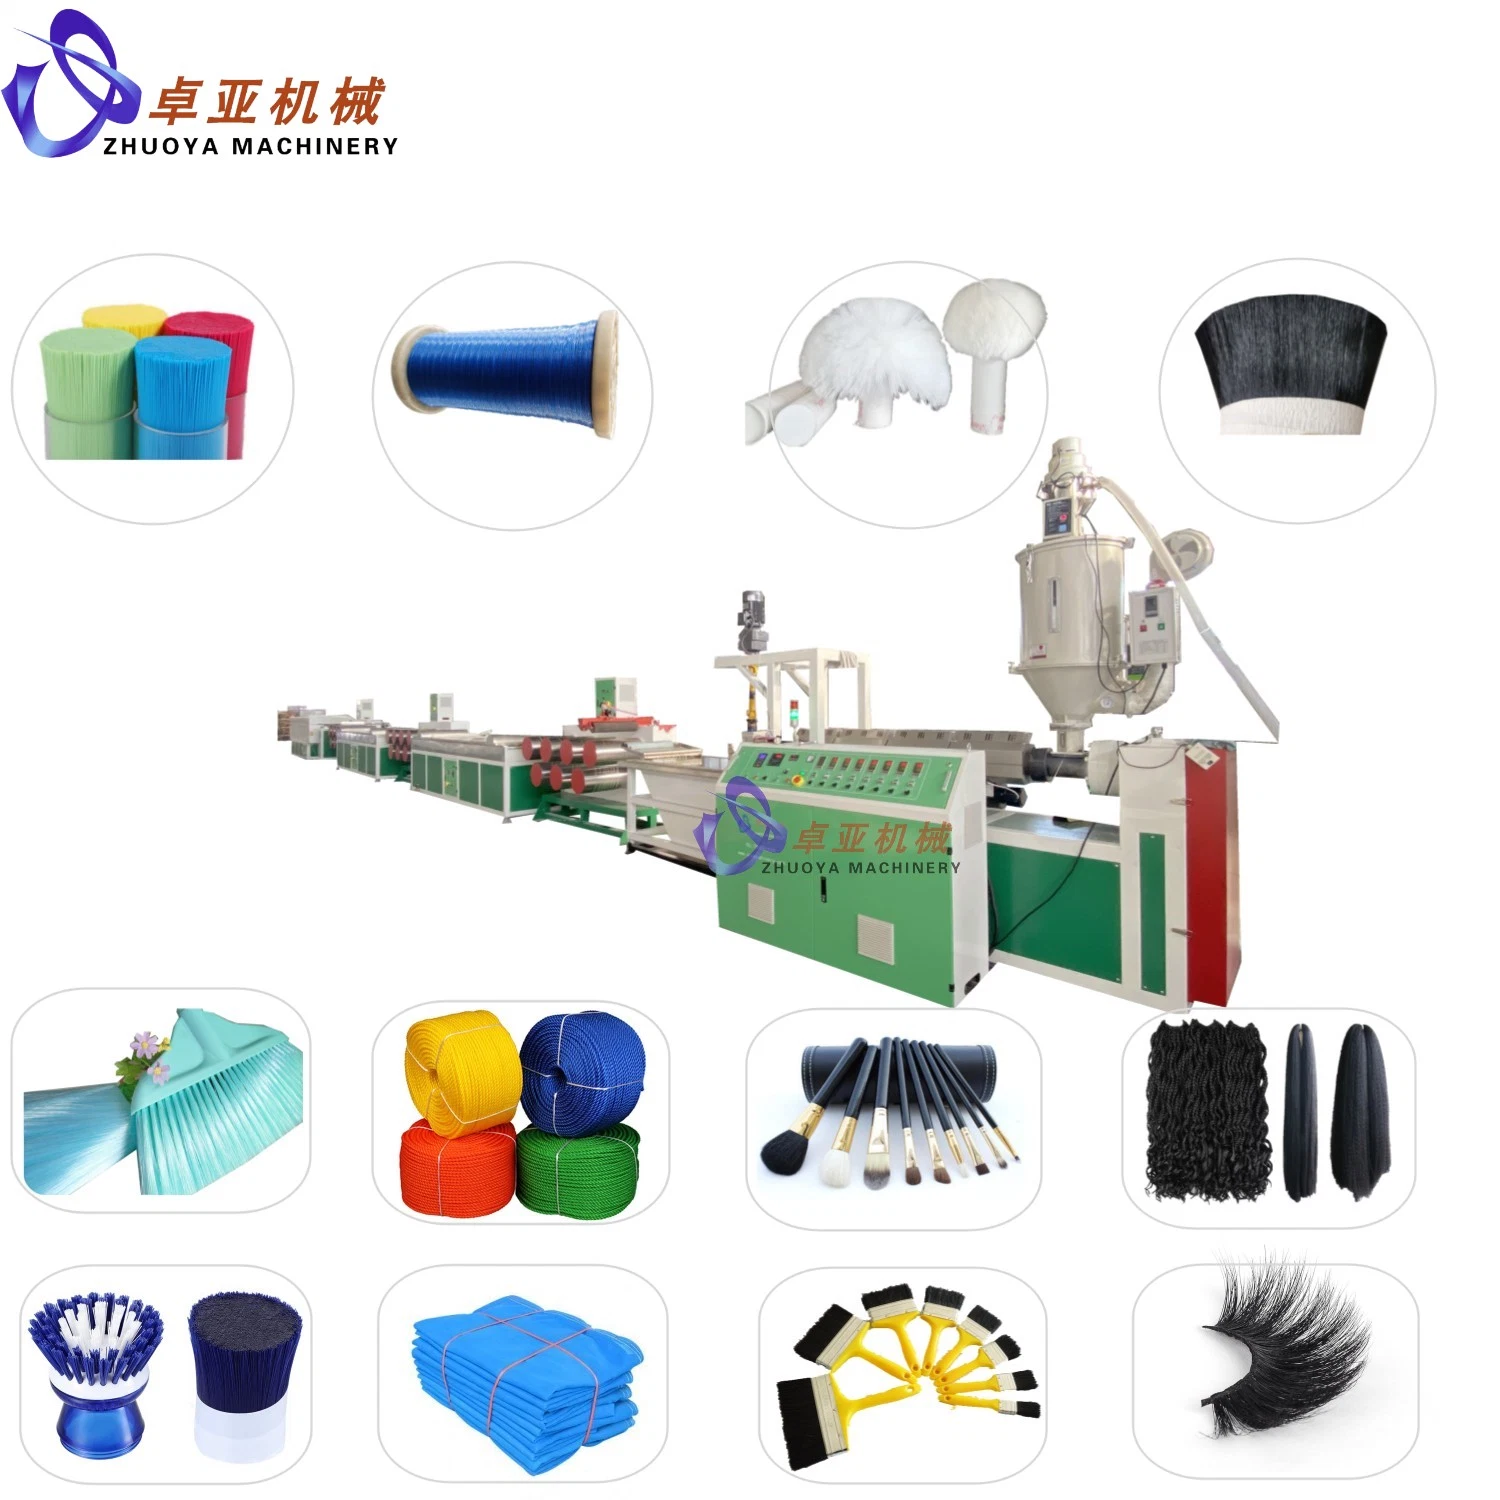 China Famous Pet/PP/PE/PA/PBT Plastic Monofilament Extruder Machine for Broom/Brush/Rope/Net/Synthetic Hair/Synthetic Eyelash Fiber Bristles10-Year Manufacturer